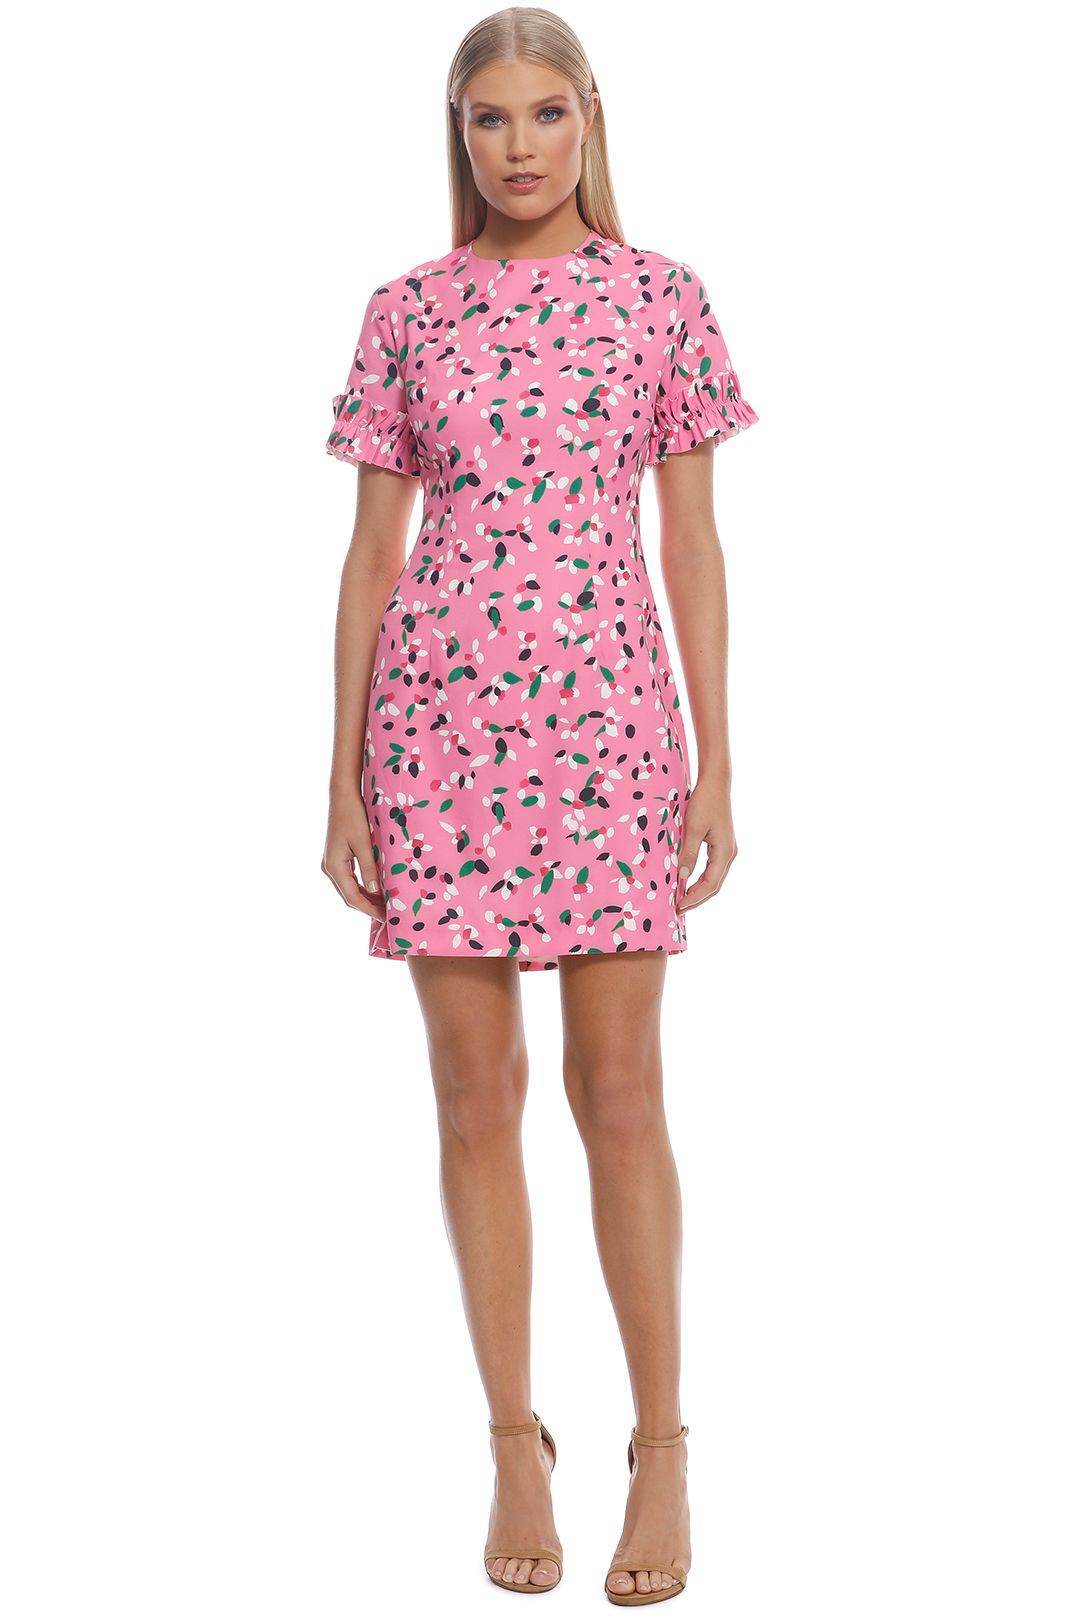 Painted Petal Ruffle Tee Dress by By Johnny for Rent